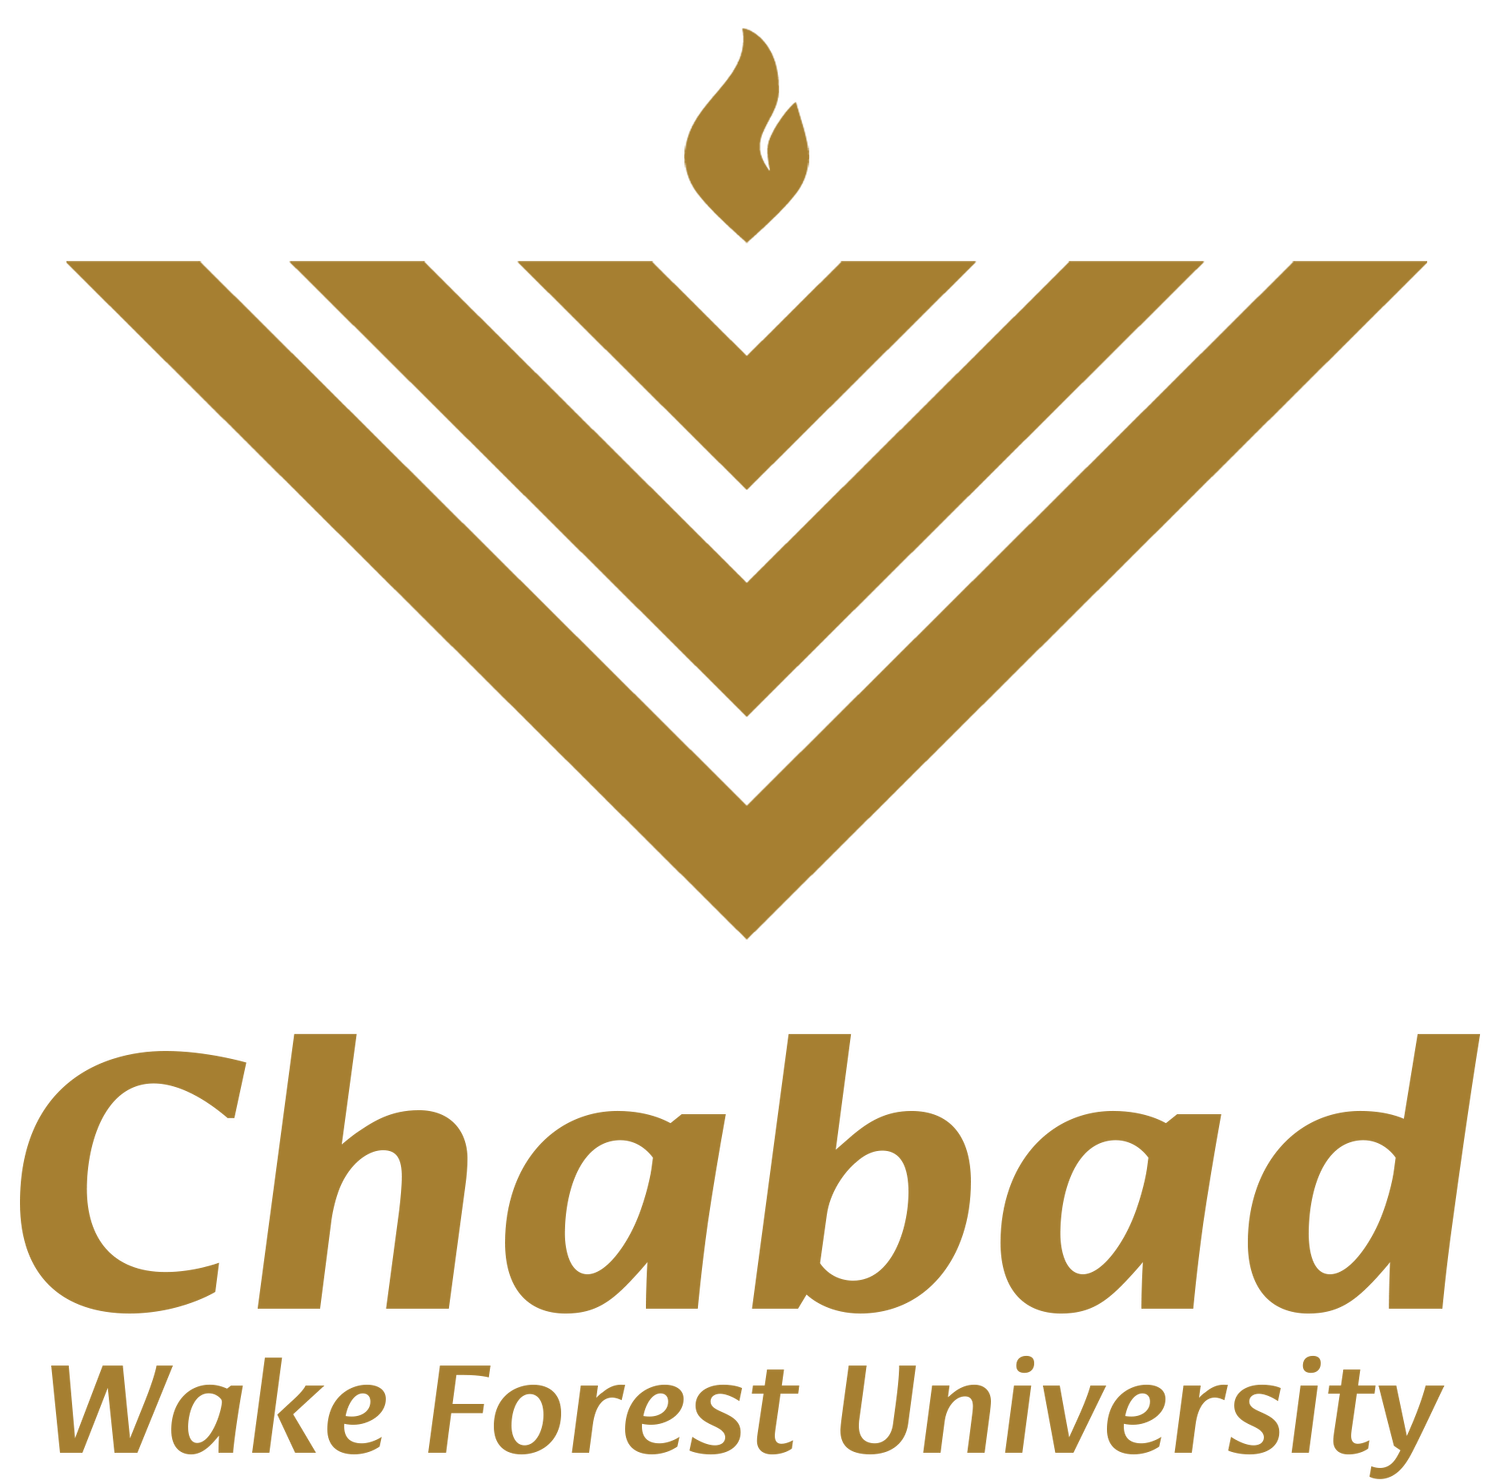 Chabad at Wake Forest University